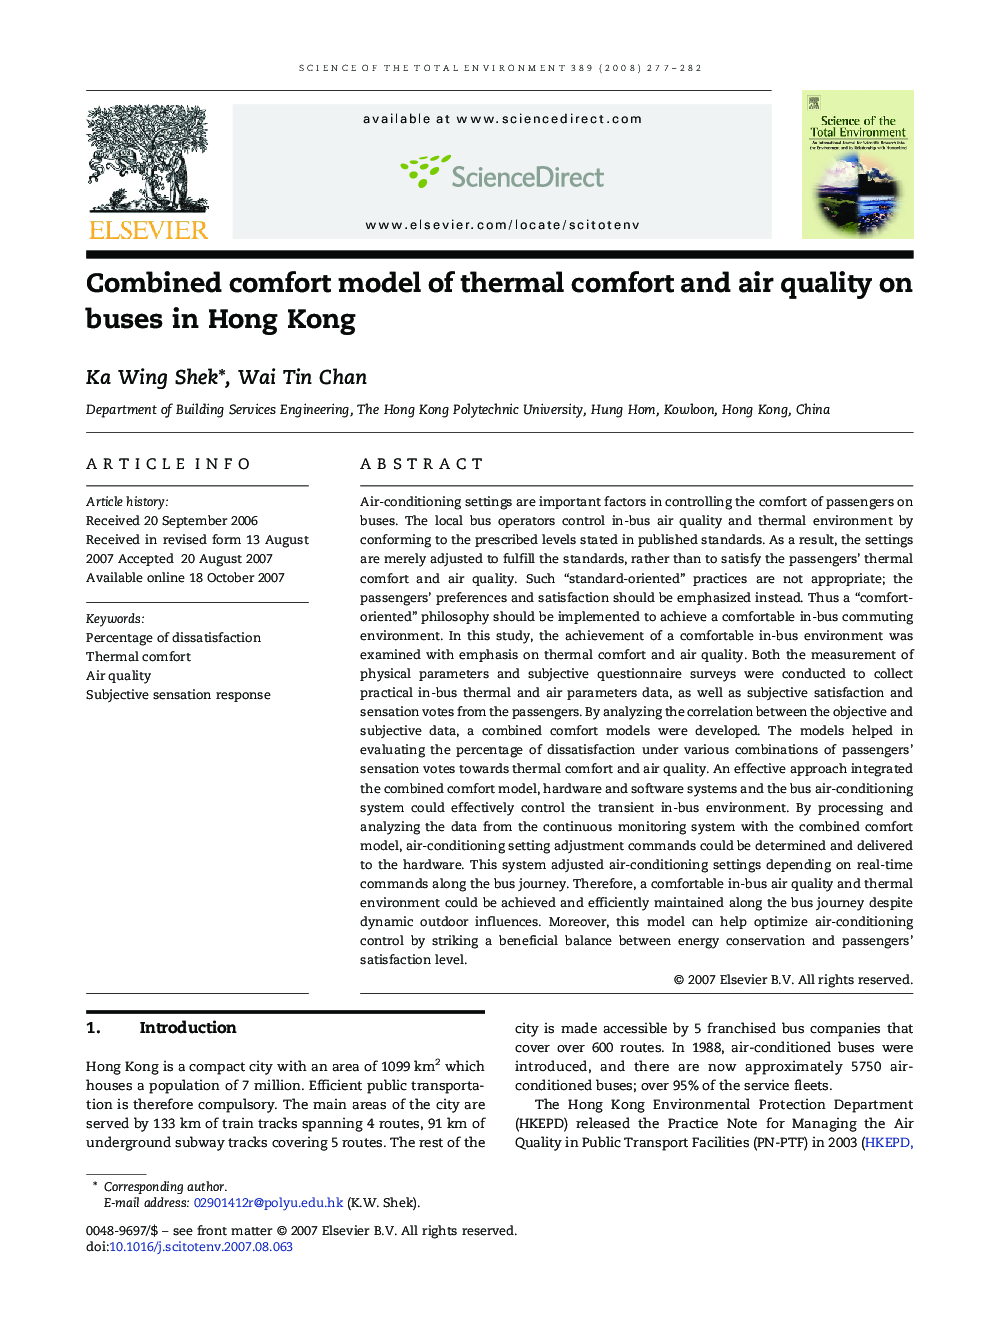 Combined comfort model of thermal comfort and air quality on buses in Hong Kong